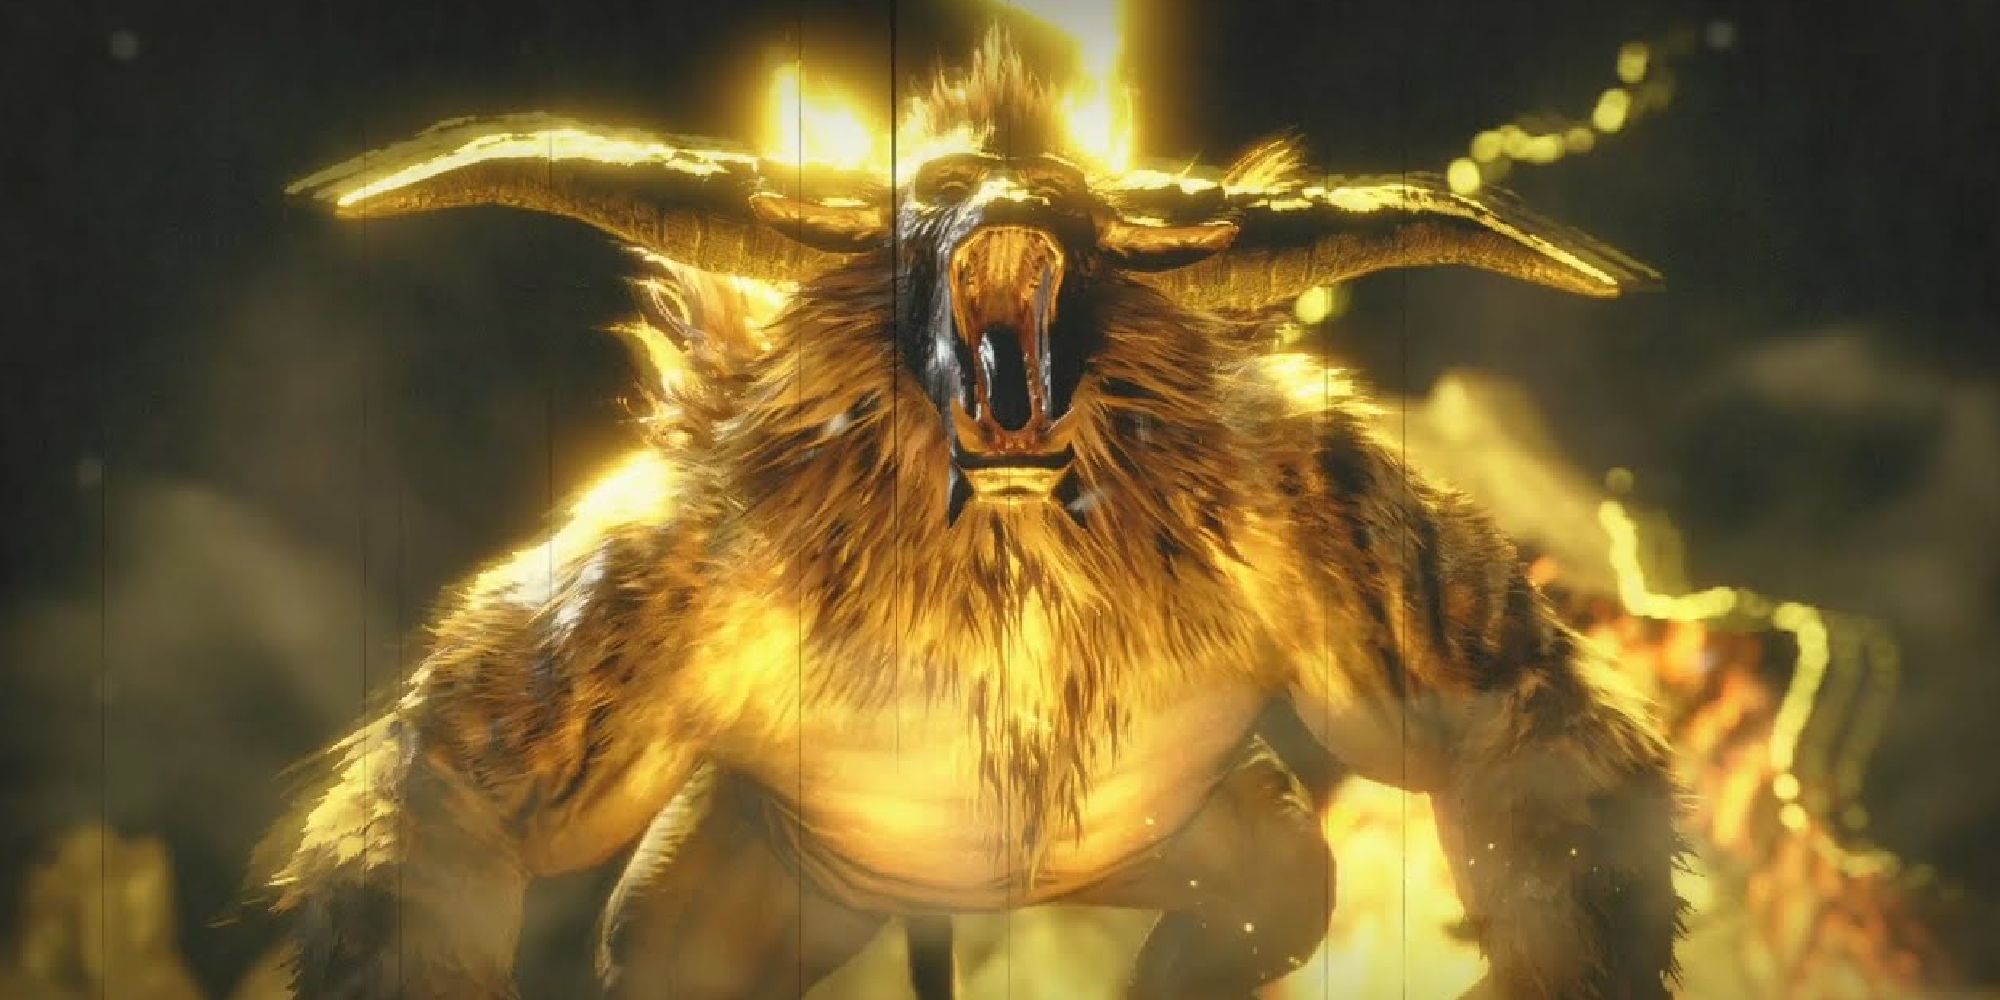 Rajang activating its golden-furred Rage Mode by roaring